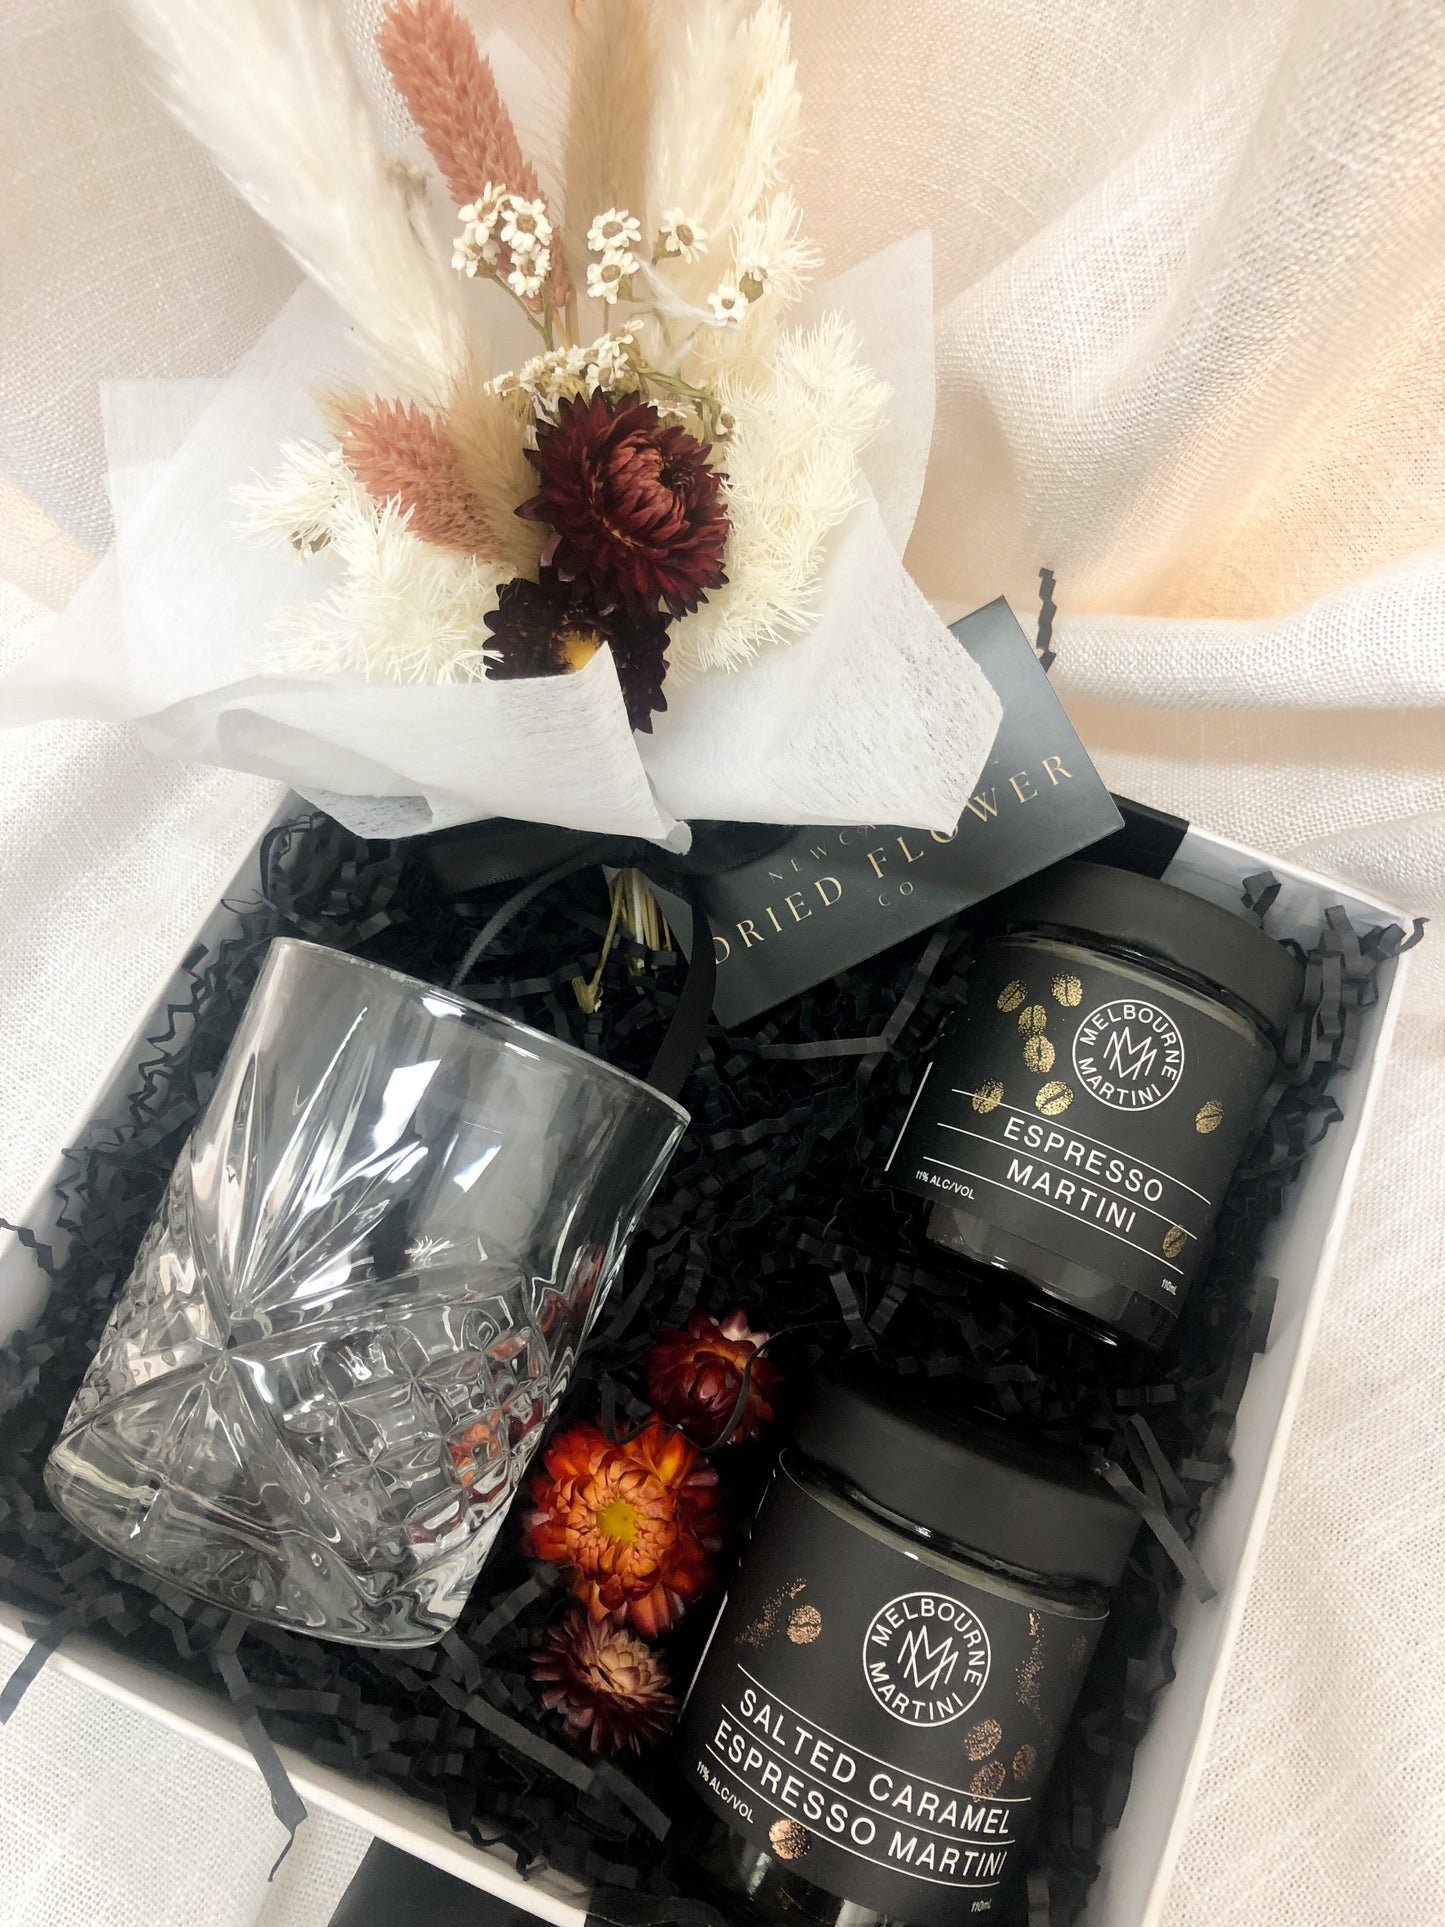 Cocktail Gift Box